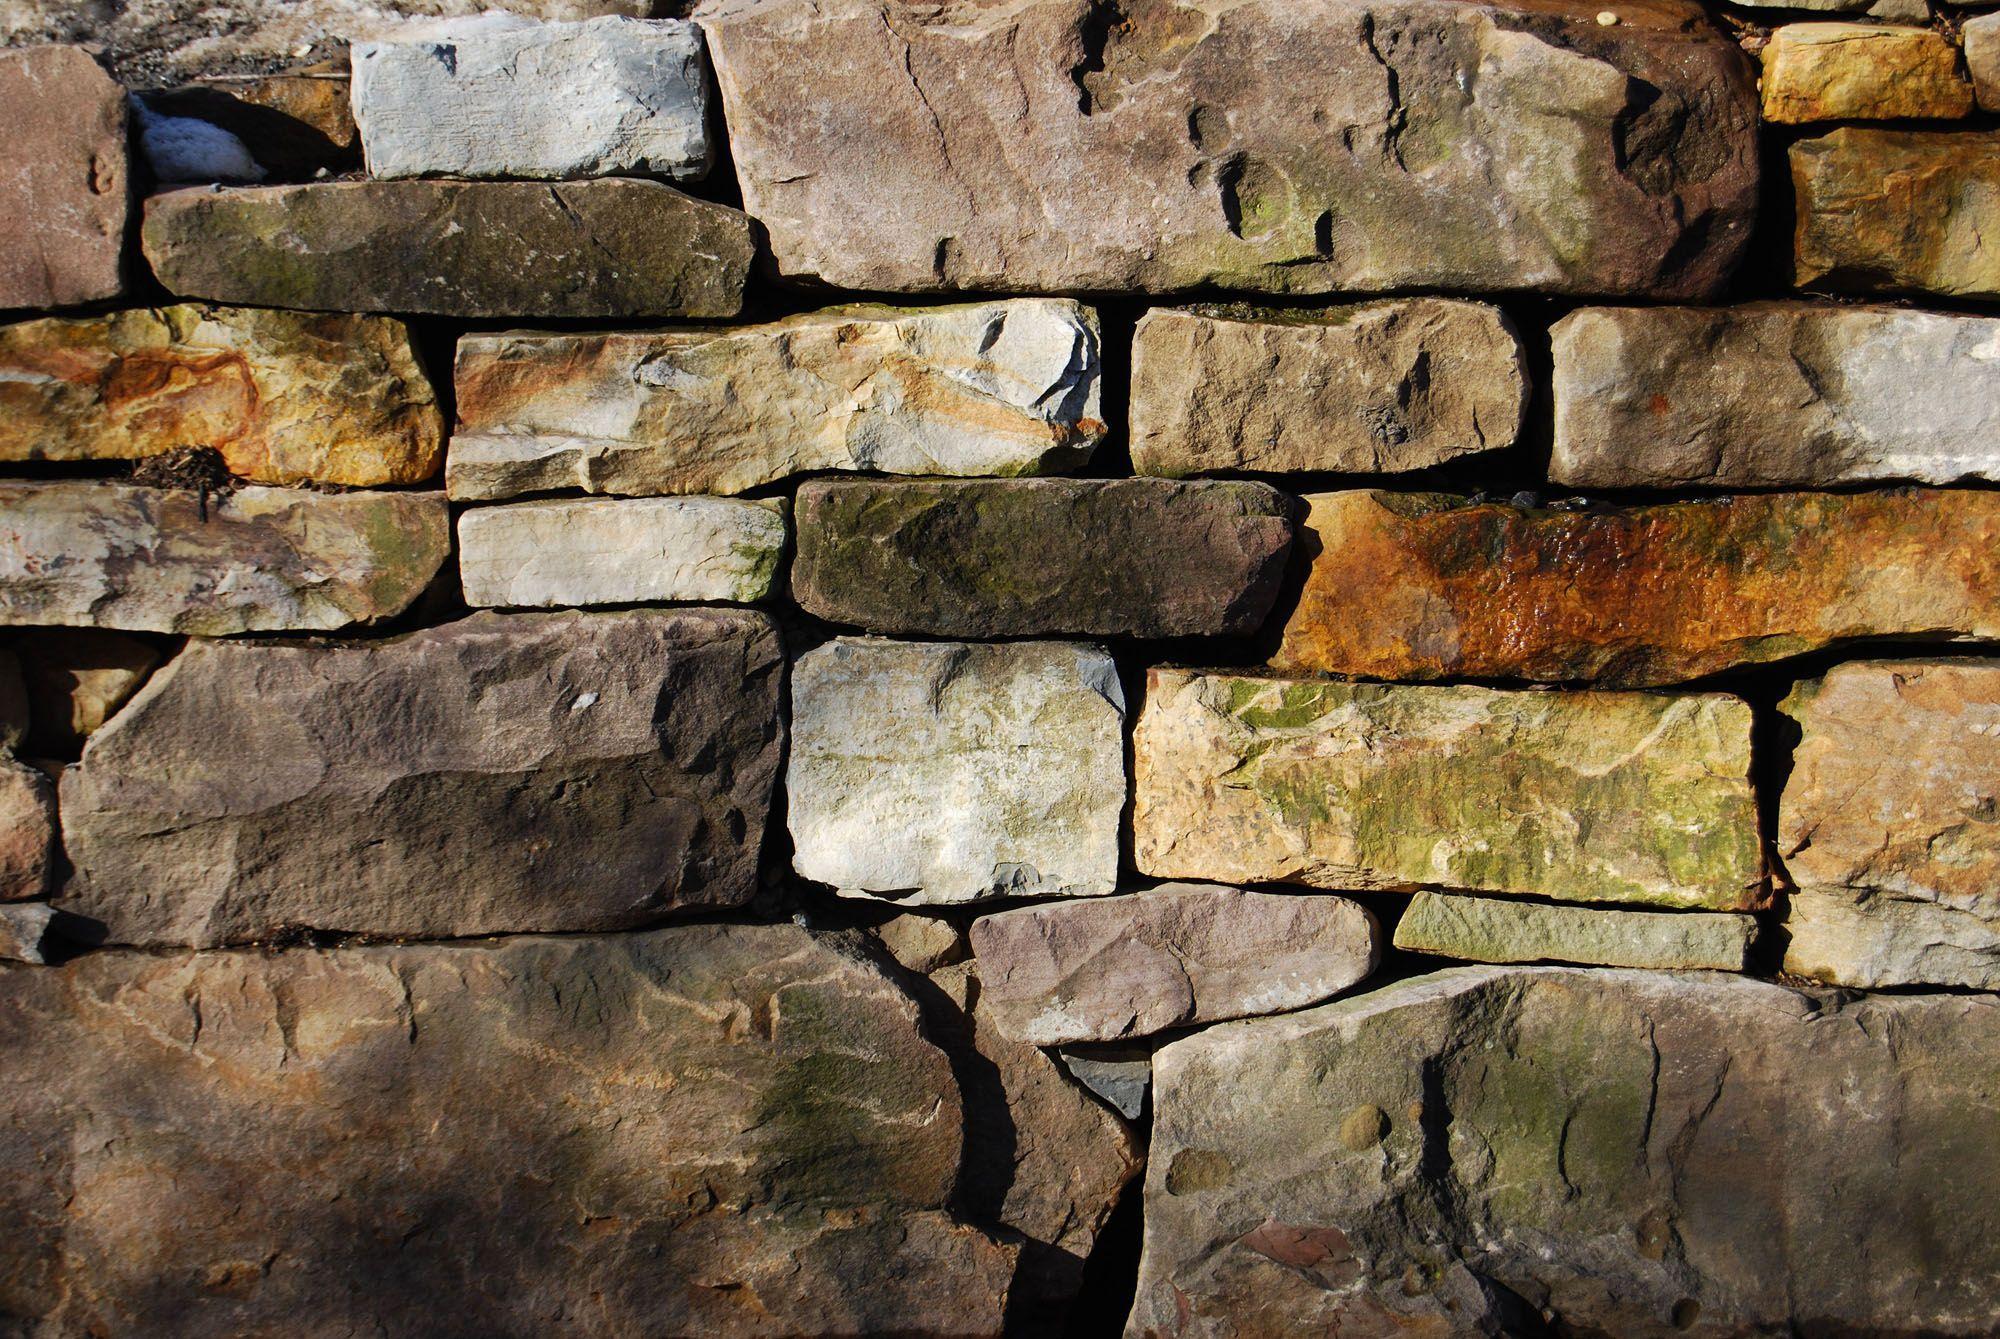 Handpicked Brick Wallpaper For Free Download